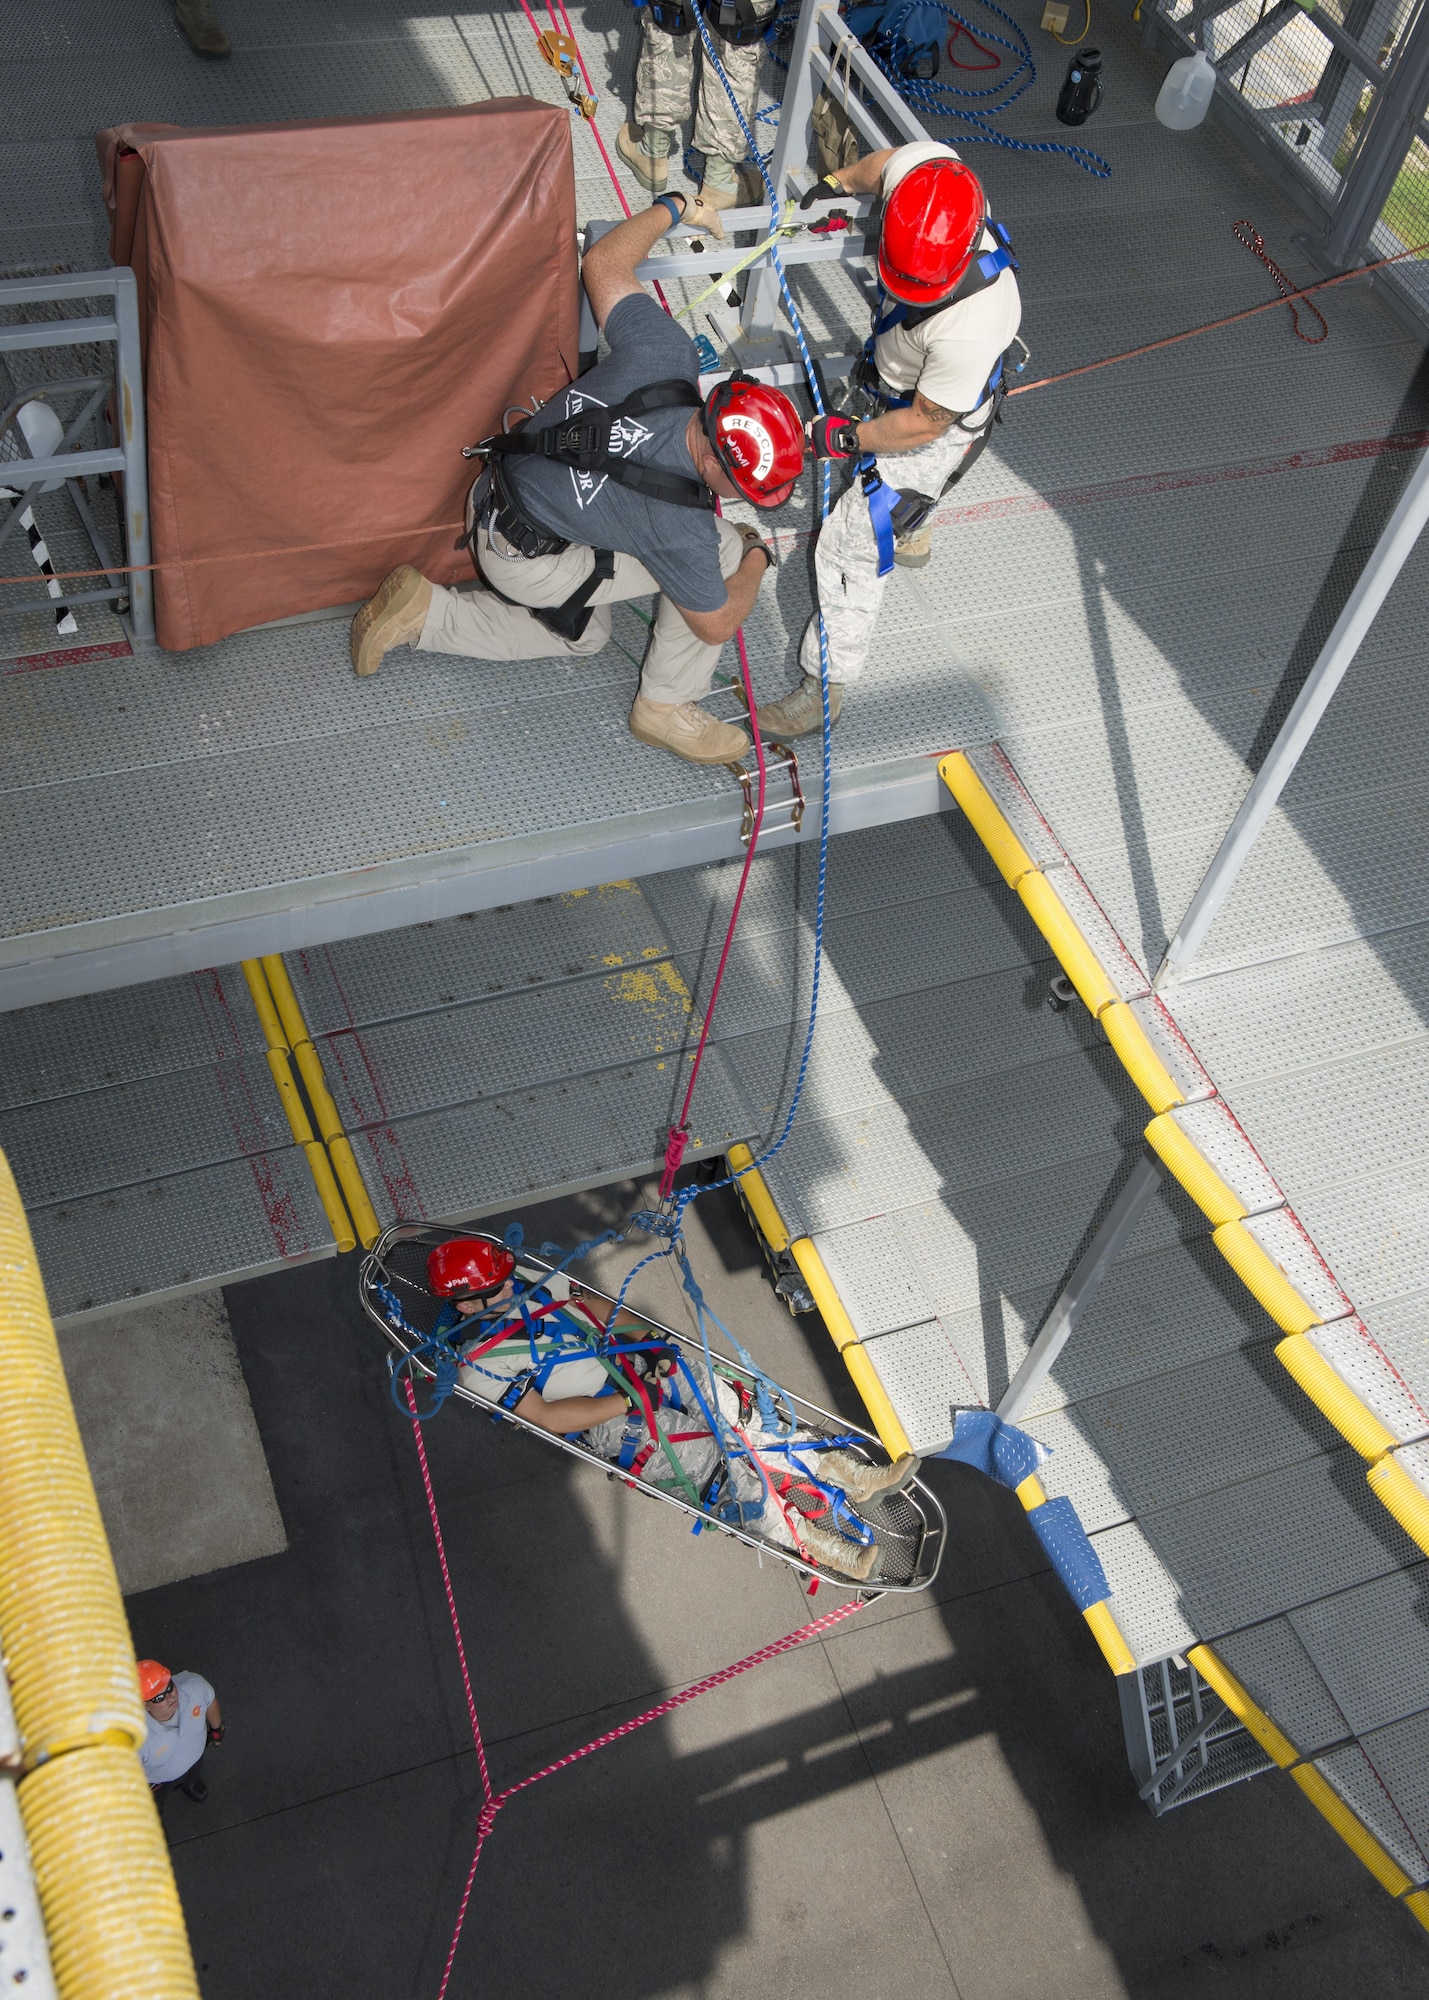 Senior Airman Shawn Davis, 436th Civil Engineer Squadron firefighter, is pulled up a structure with ropes during a Rescue Technician Course Aug. 18, 2016, at Dover Air Force Base, Del. For this training scenario, Davis acted as a simulated injured victim. (U.S. Air Force photo by Senior Airman Zachary Cacicia)